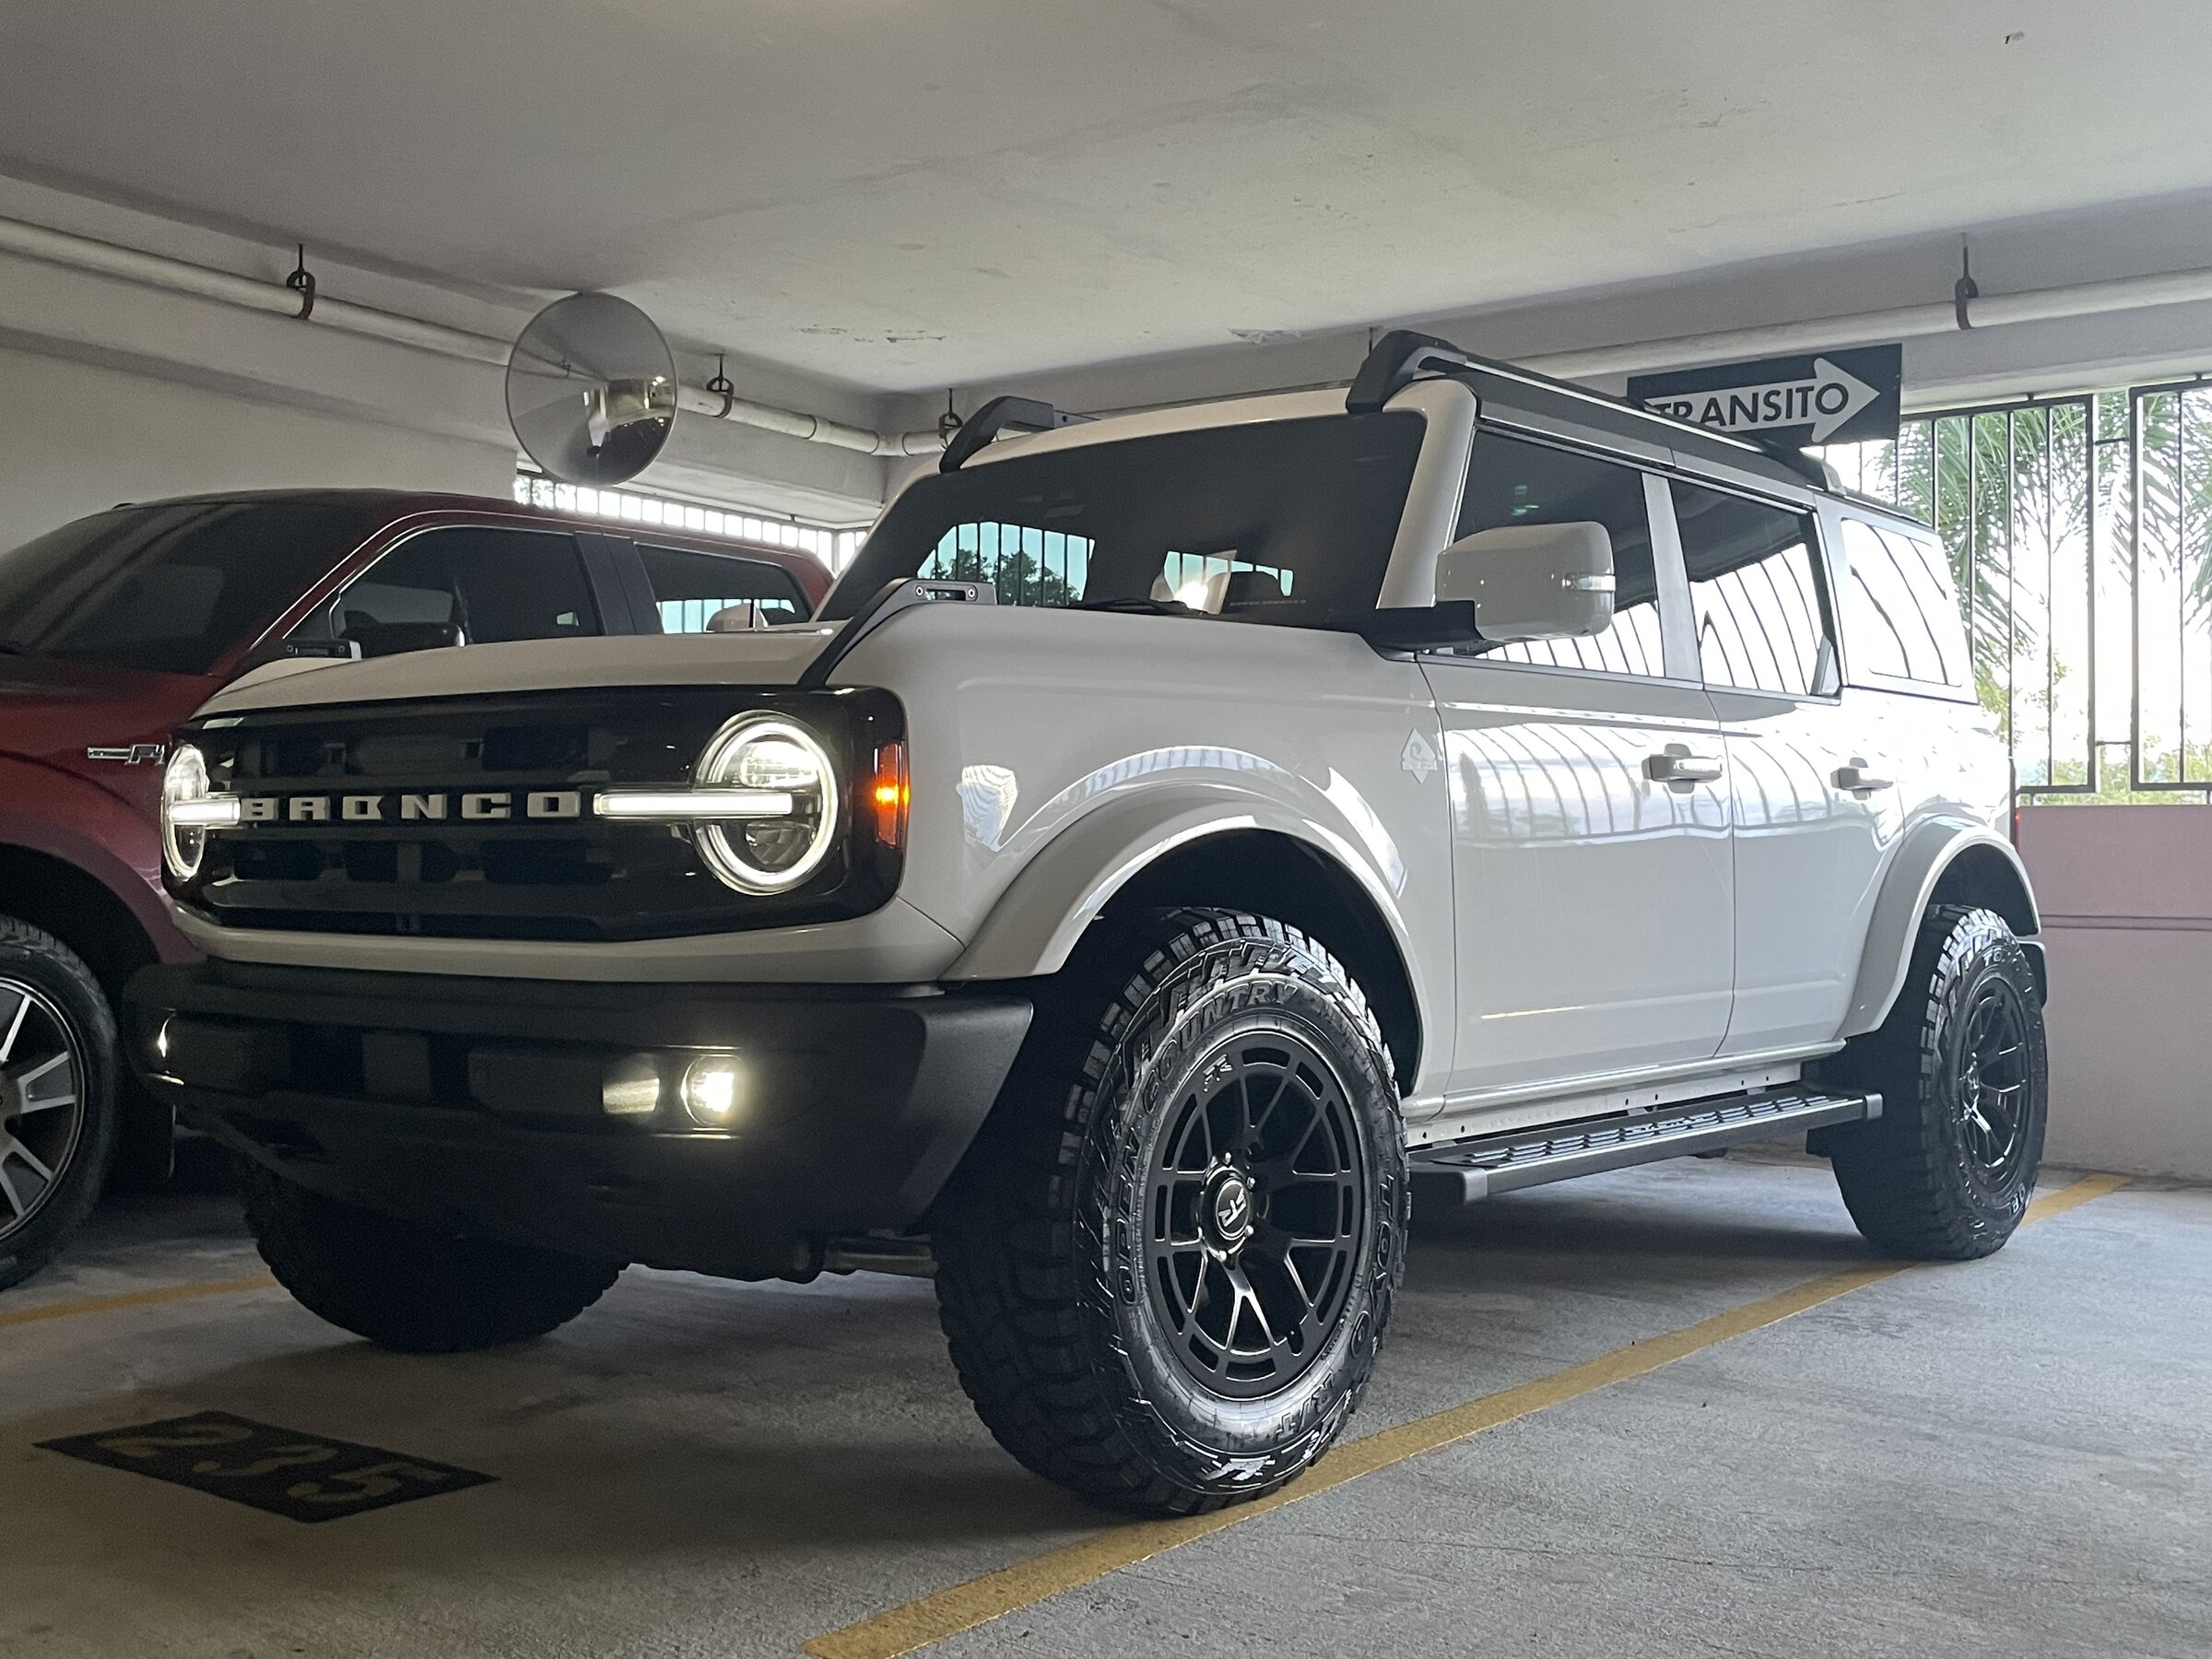 Ford Bronco Show us your installed wheel / tire upgrades here! (Pics) 68B27B7B-CEE2-411D-9657-0AD73B7C414D